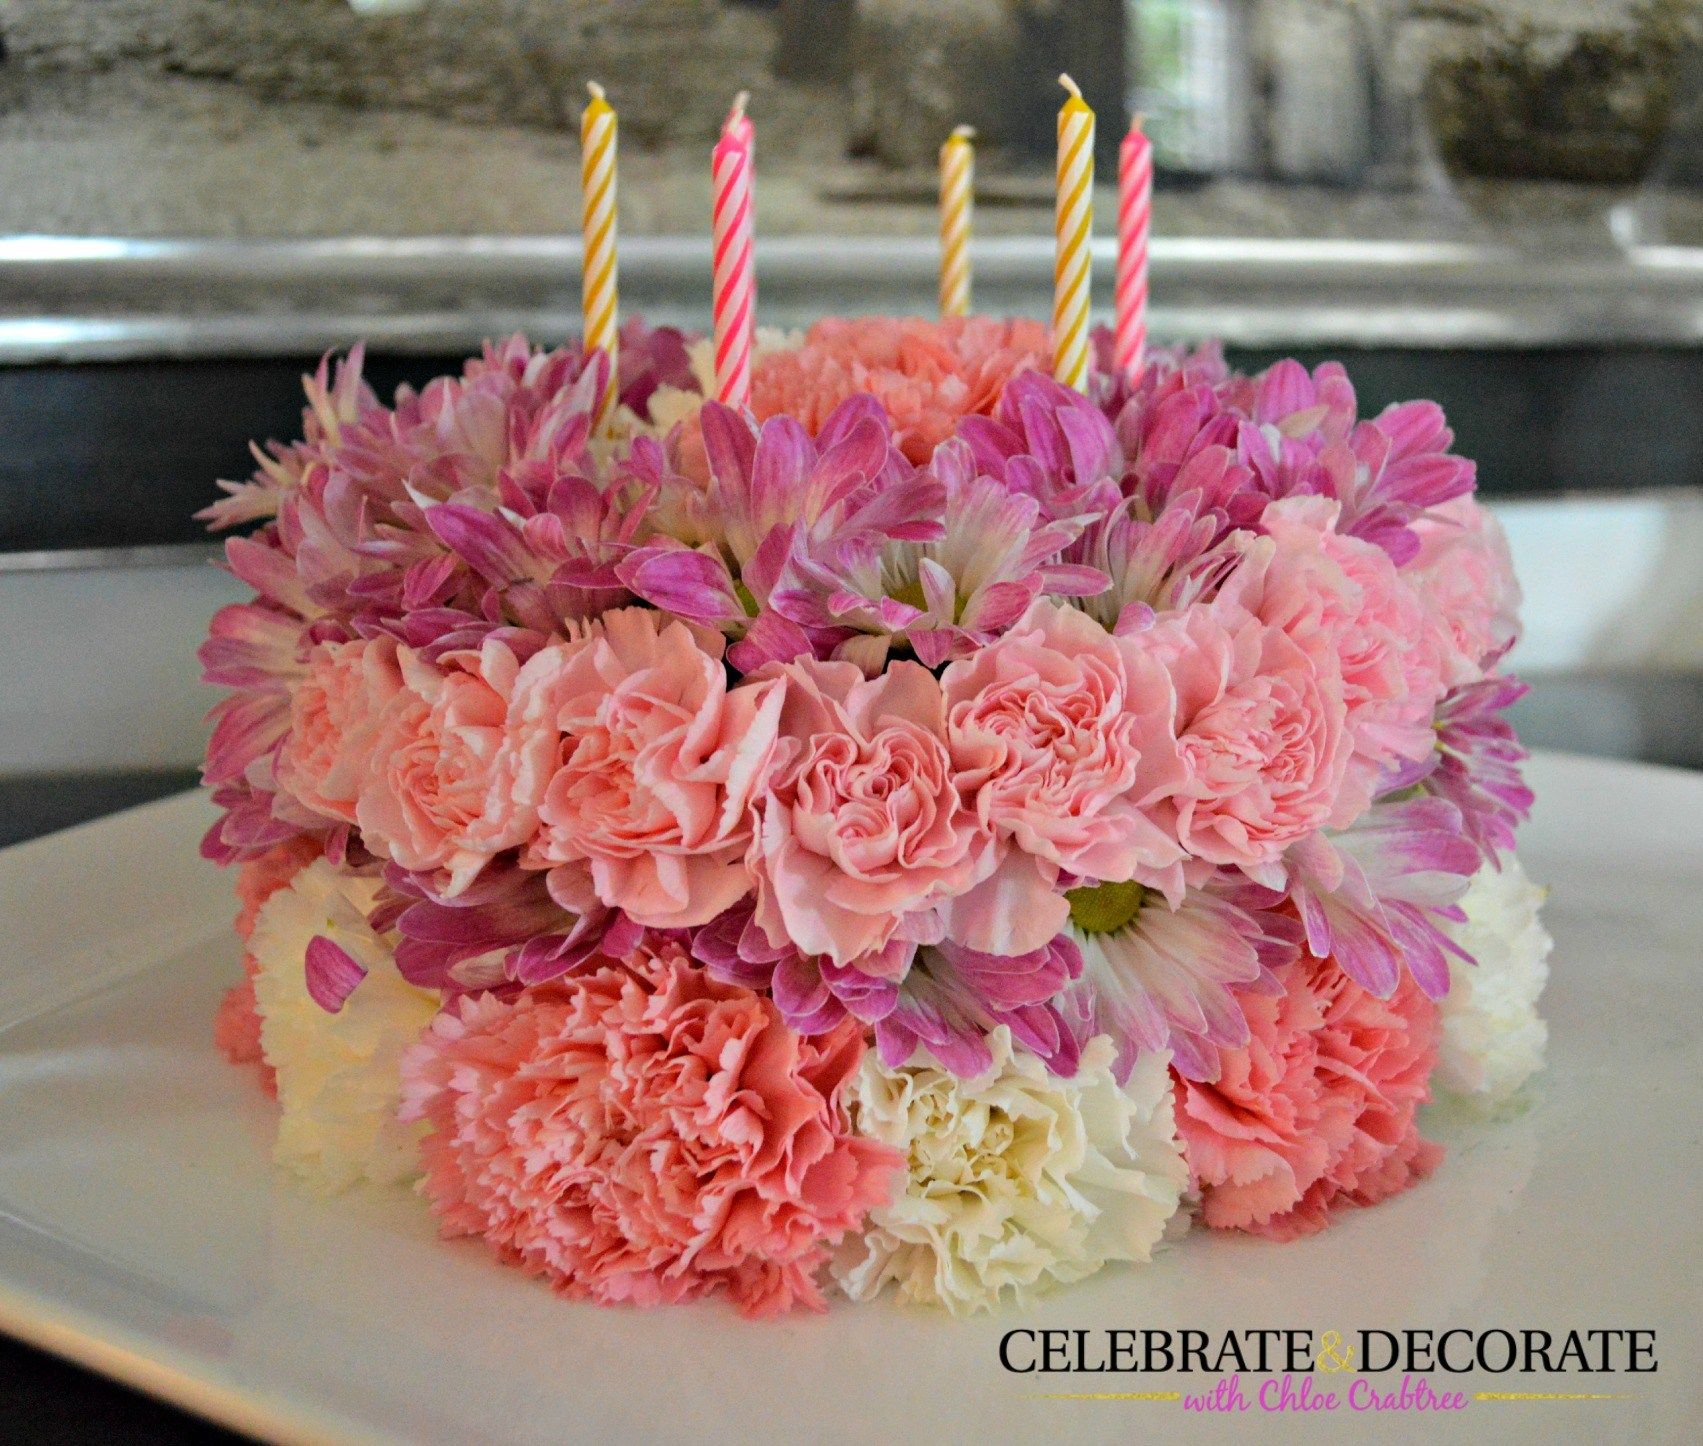 Birthday Cake Flowers How To Make A Floral Birthday Cake ...